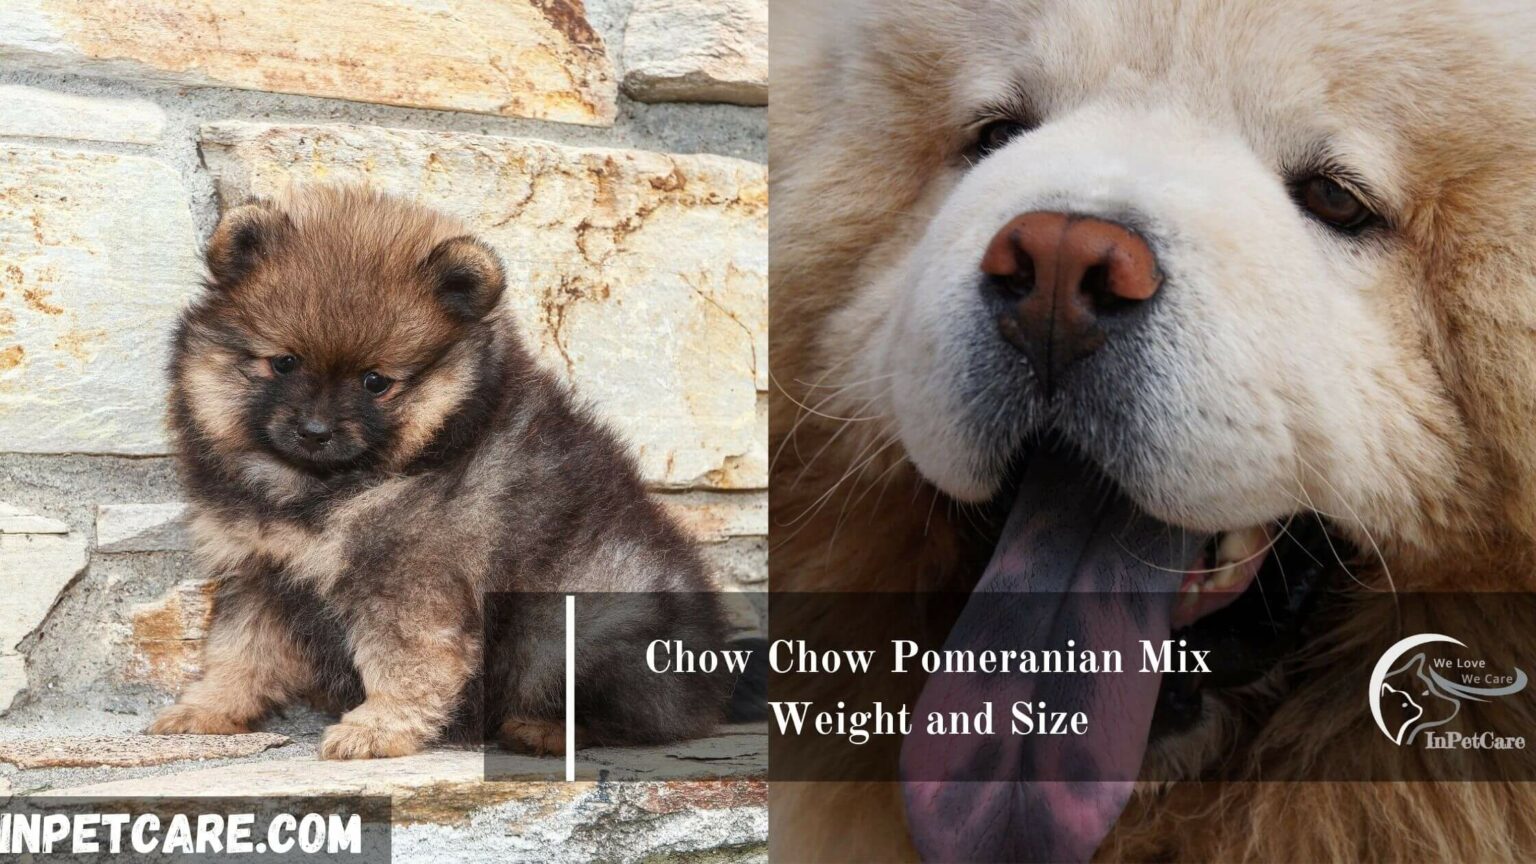 Chow Chow Pomeranian Mix A Complete Guide (With Pictures)